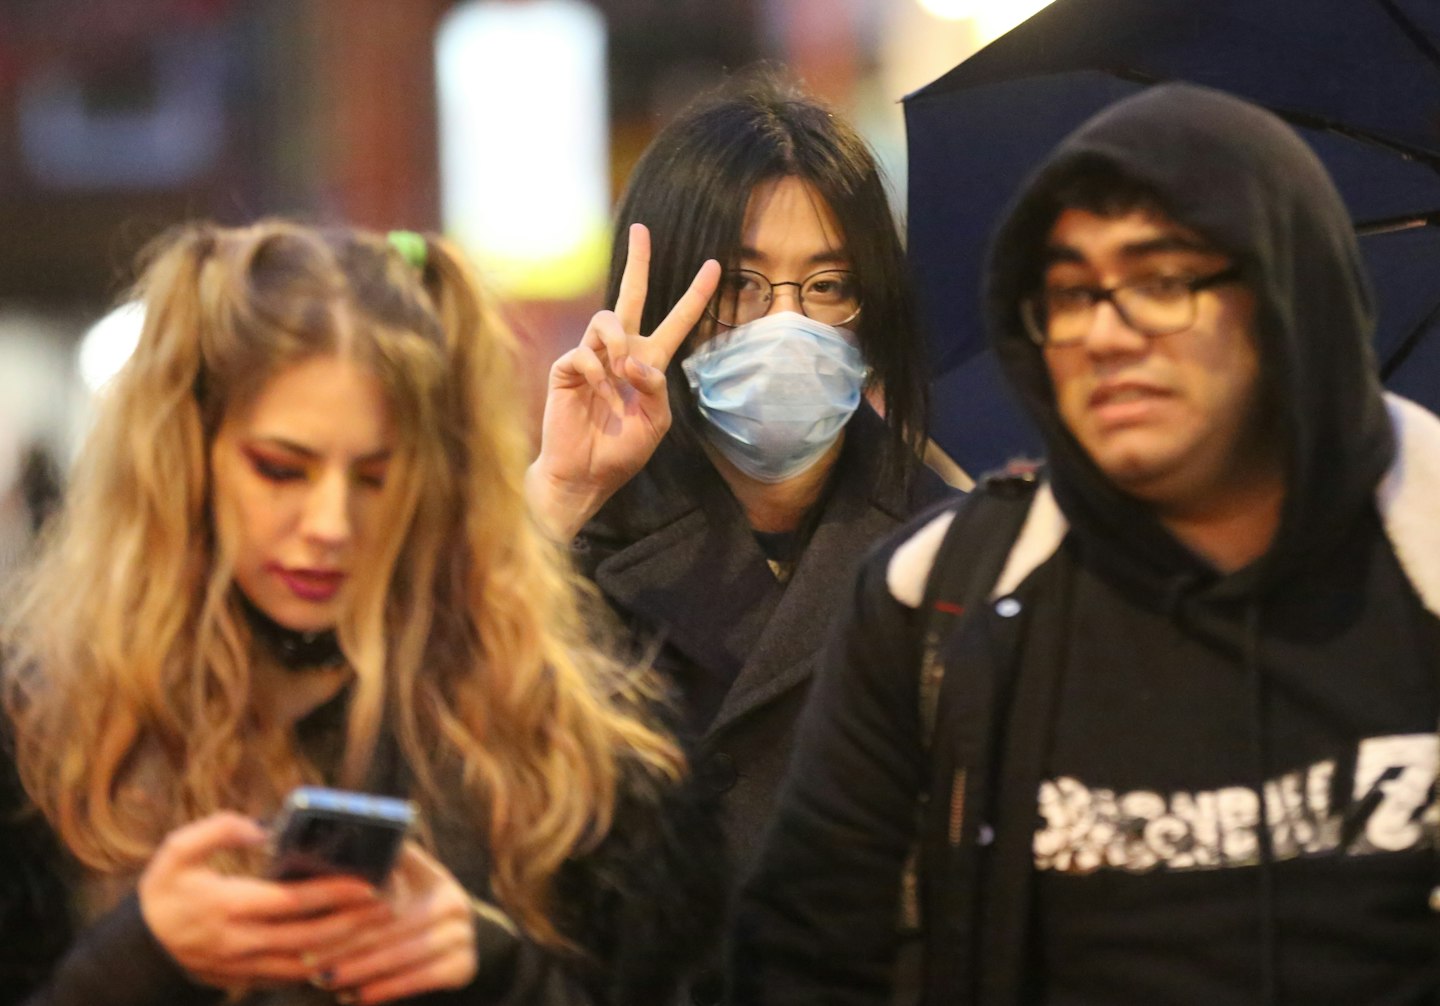 People wearing masks to protect themselves from coronavirus